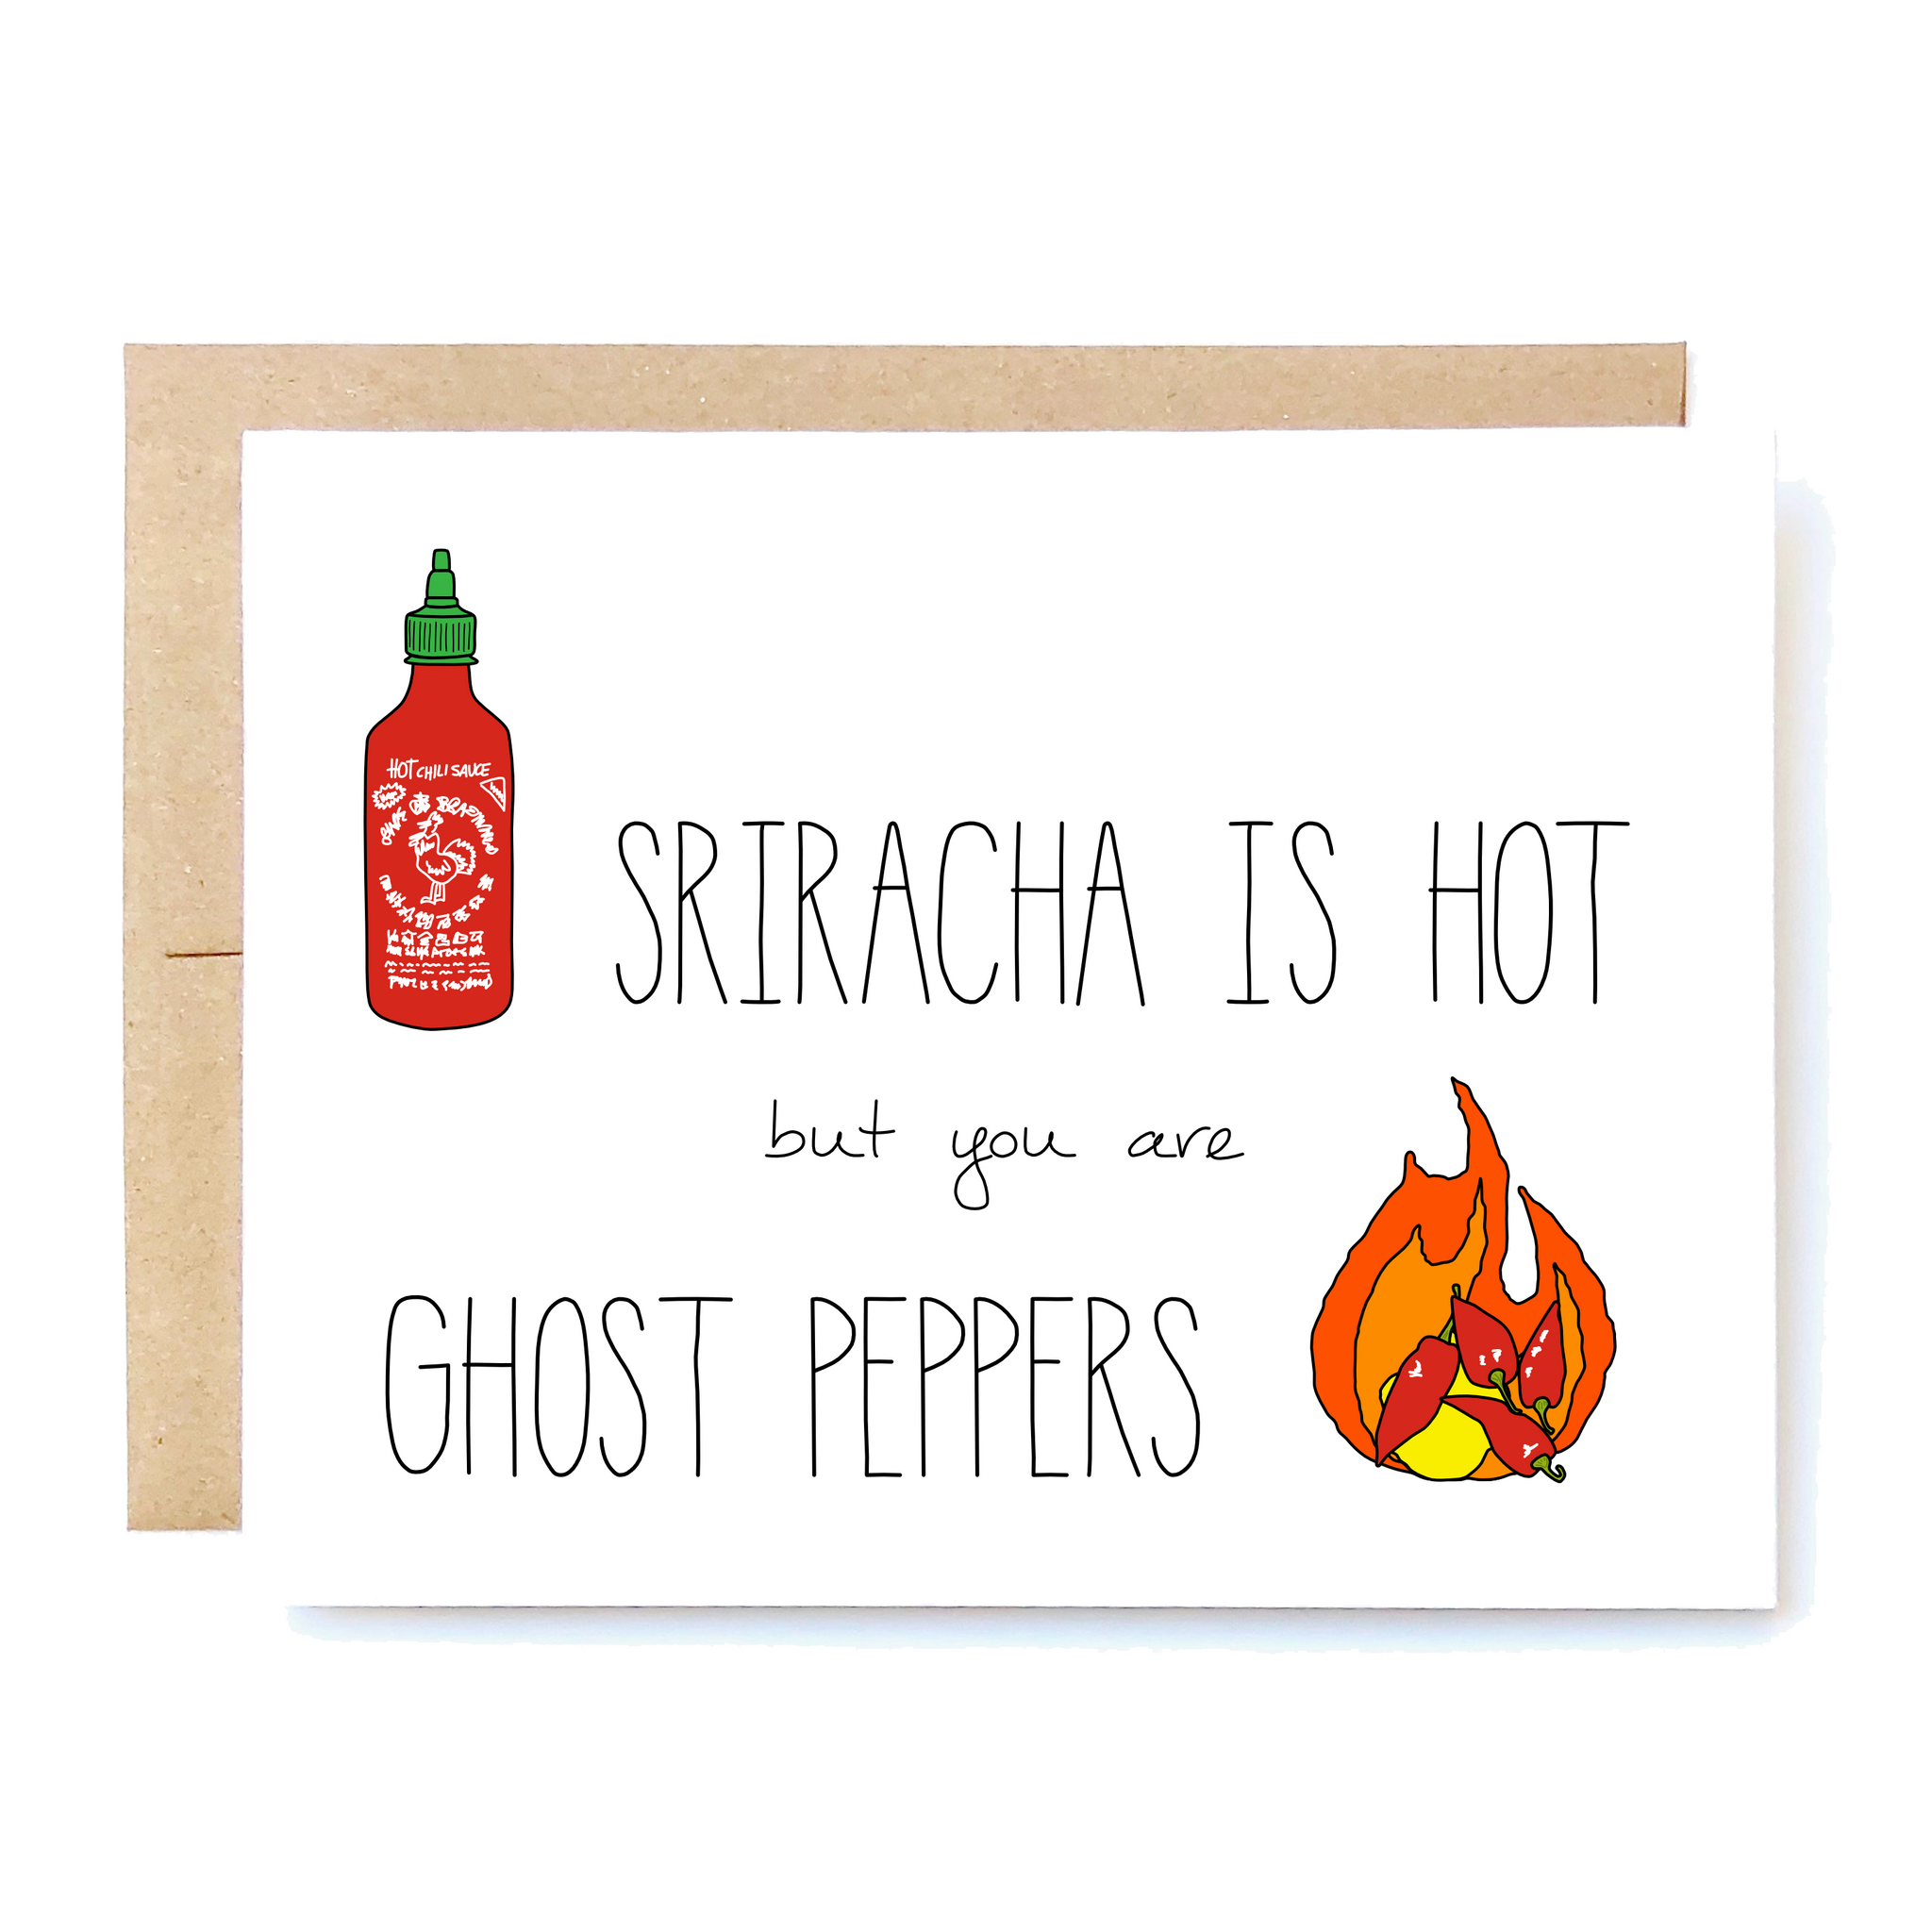 Card Front: Sriracha is hot, but you are ghost peppers.